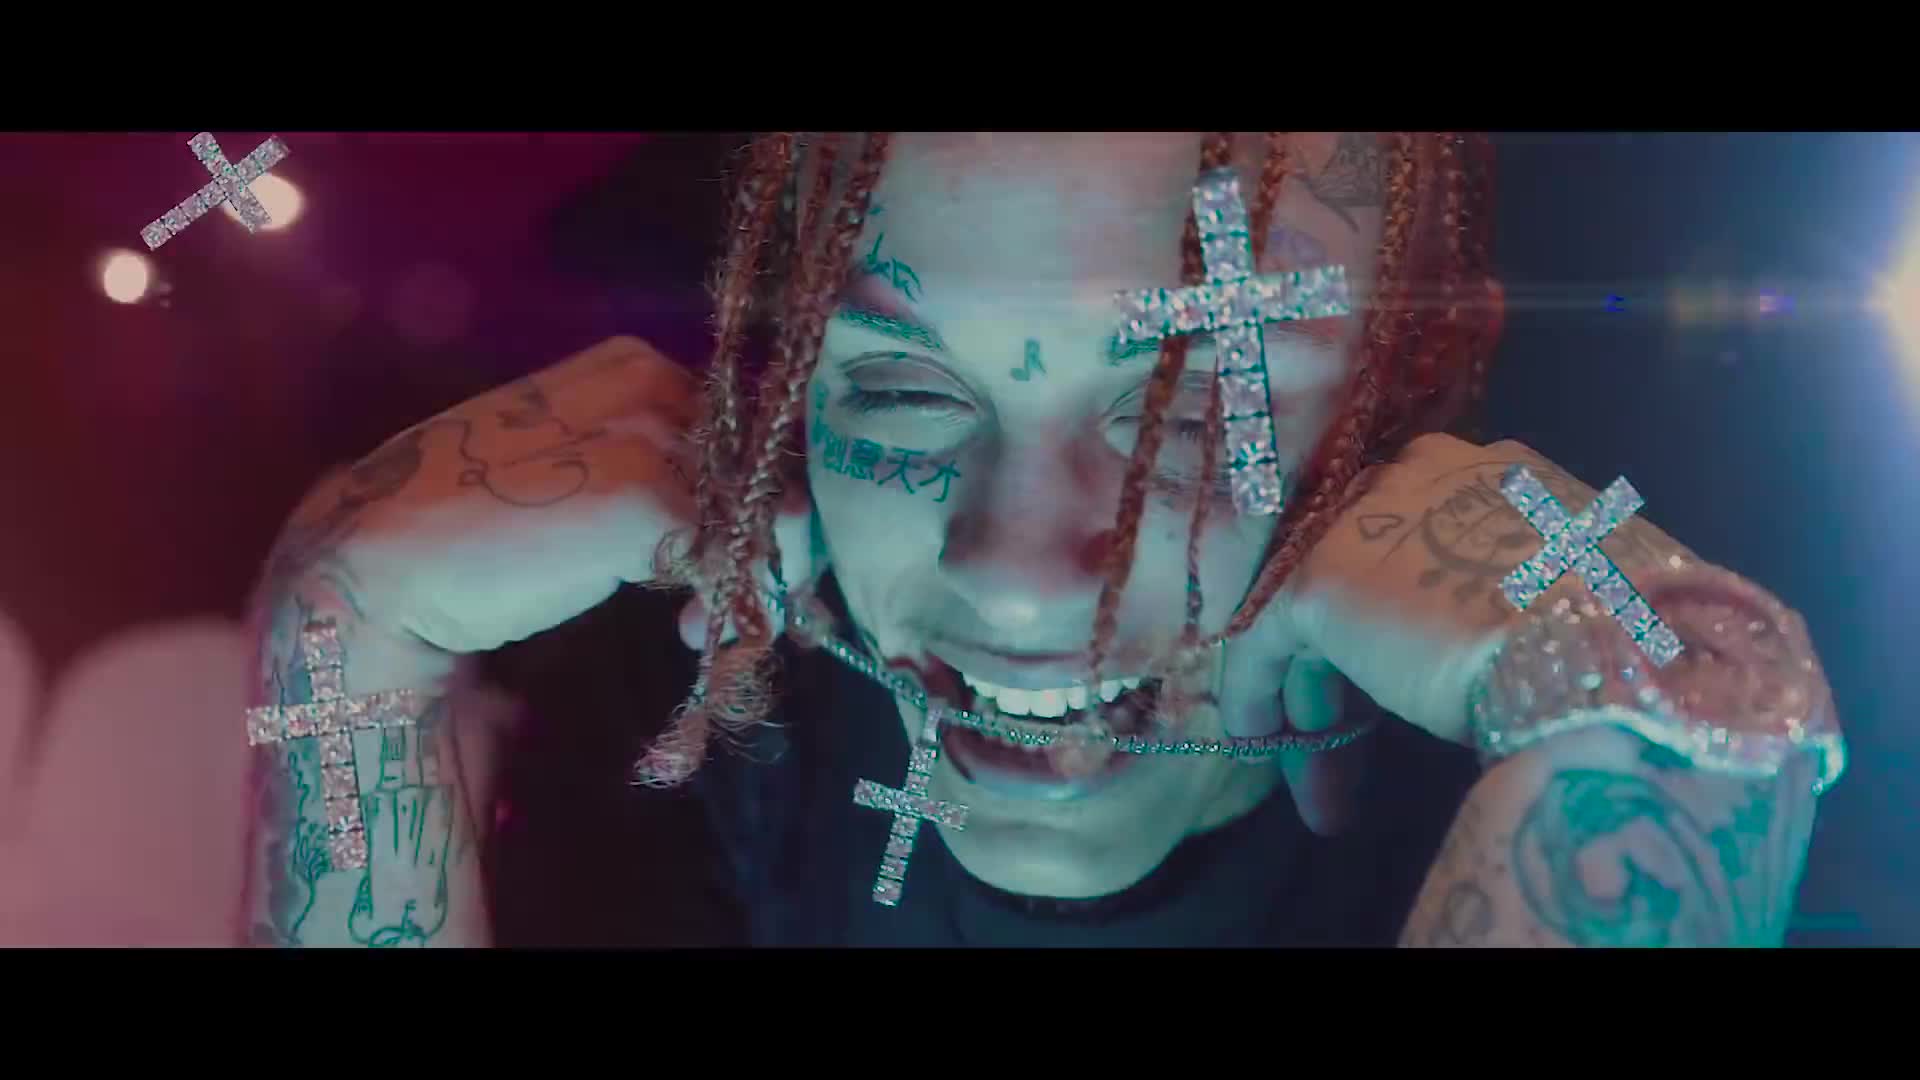 Lil Skies X Yung Pinch Know You [Official Video] Dir